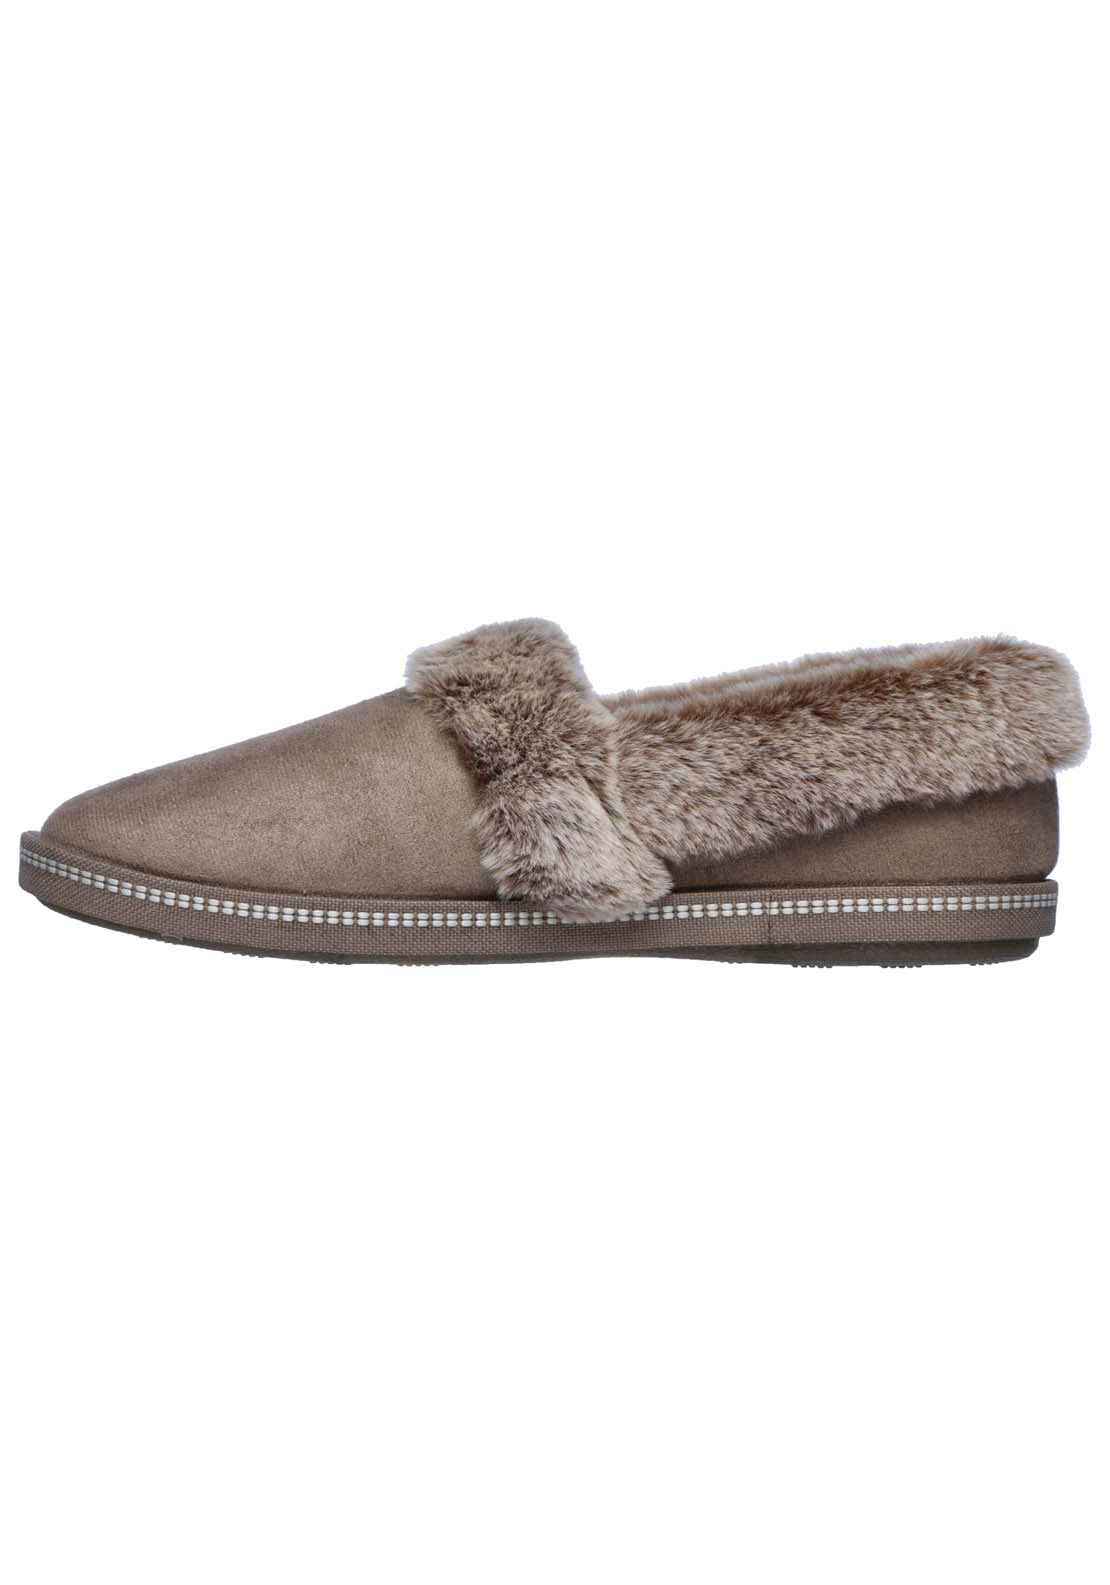 Skechers Cosy Campfire Slipper - Taupe 3 Shaws Department Stores